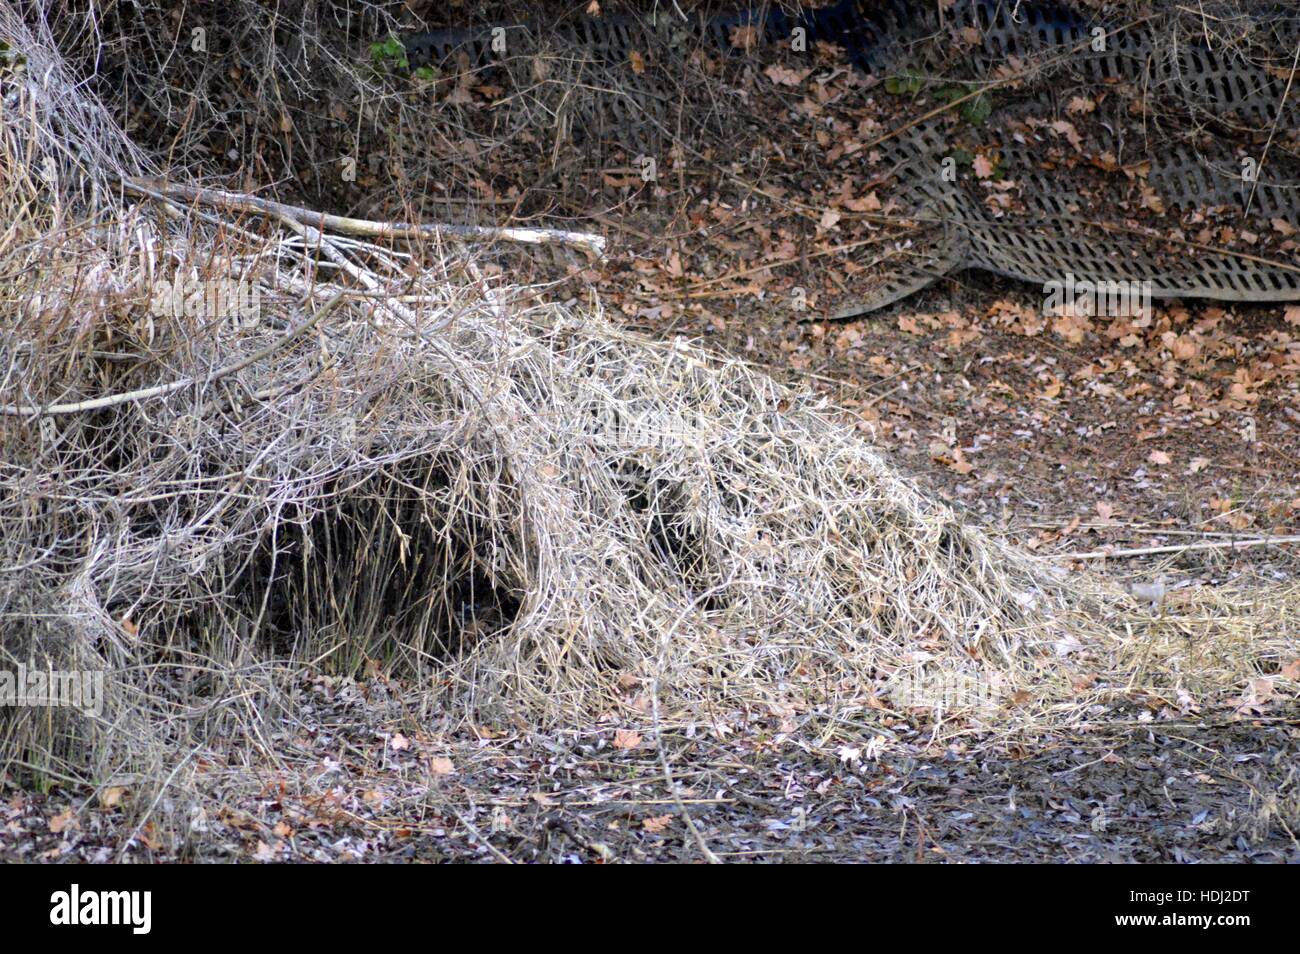 Nest of Gray Heron made of dead branches and straw Stock Photo